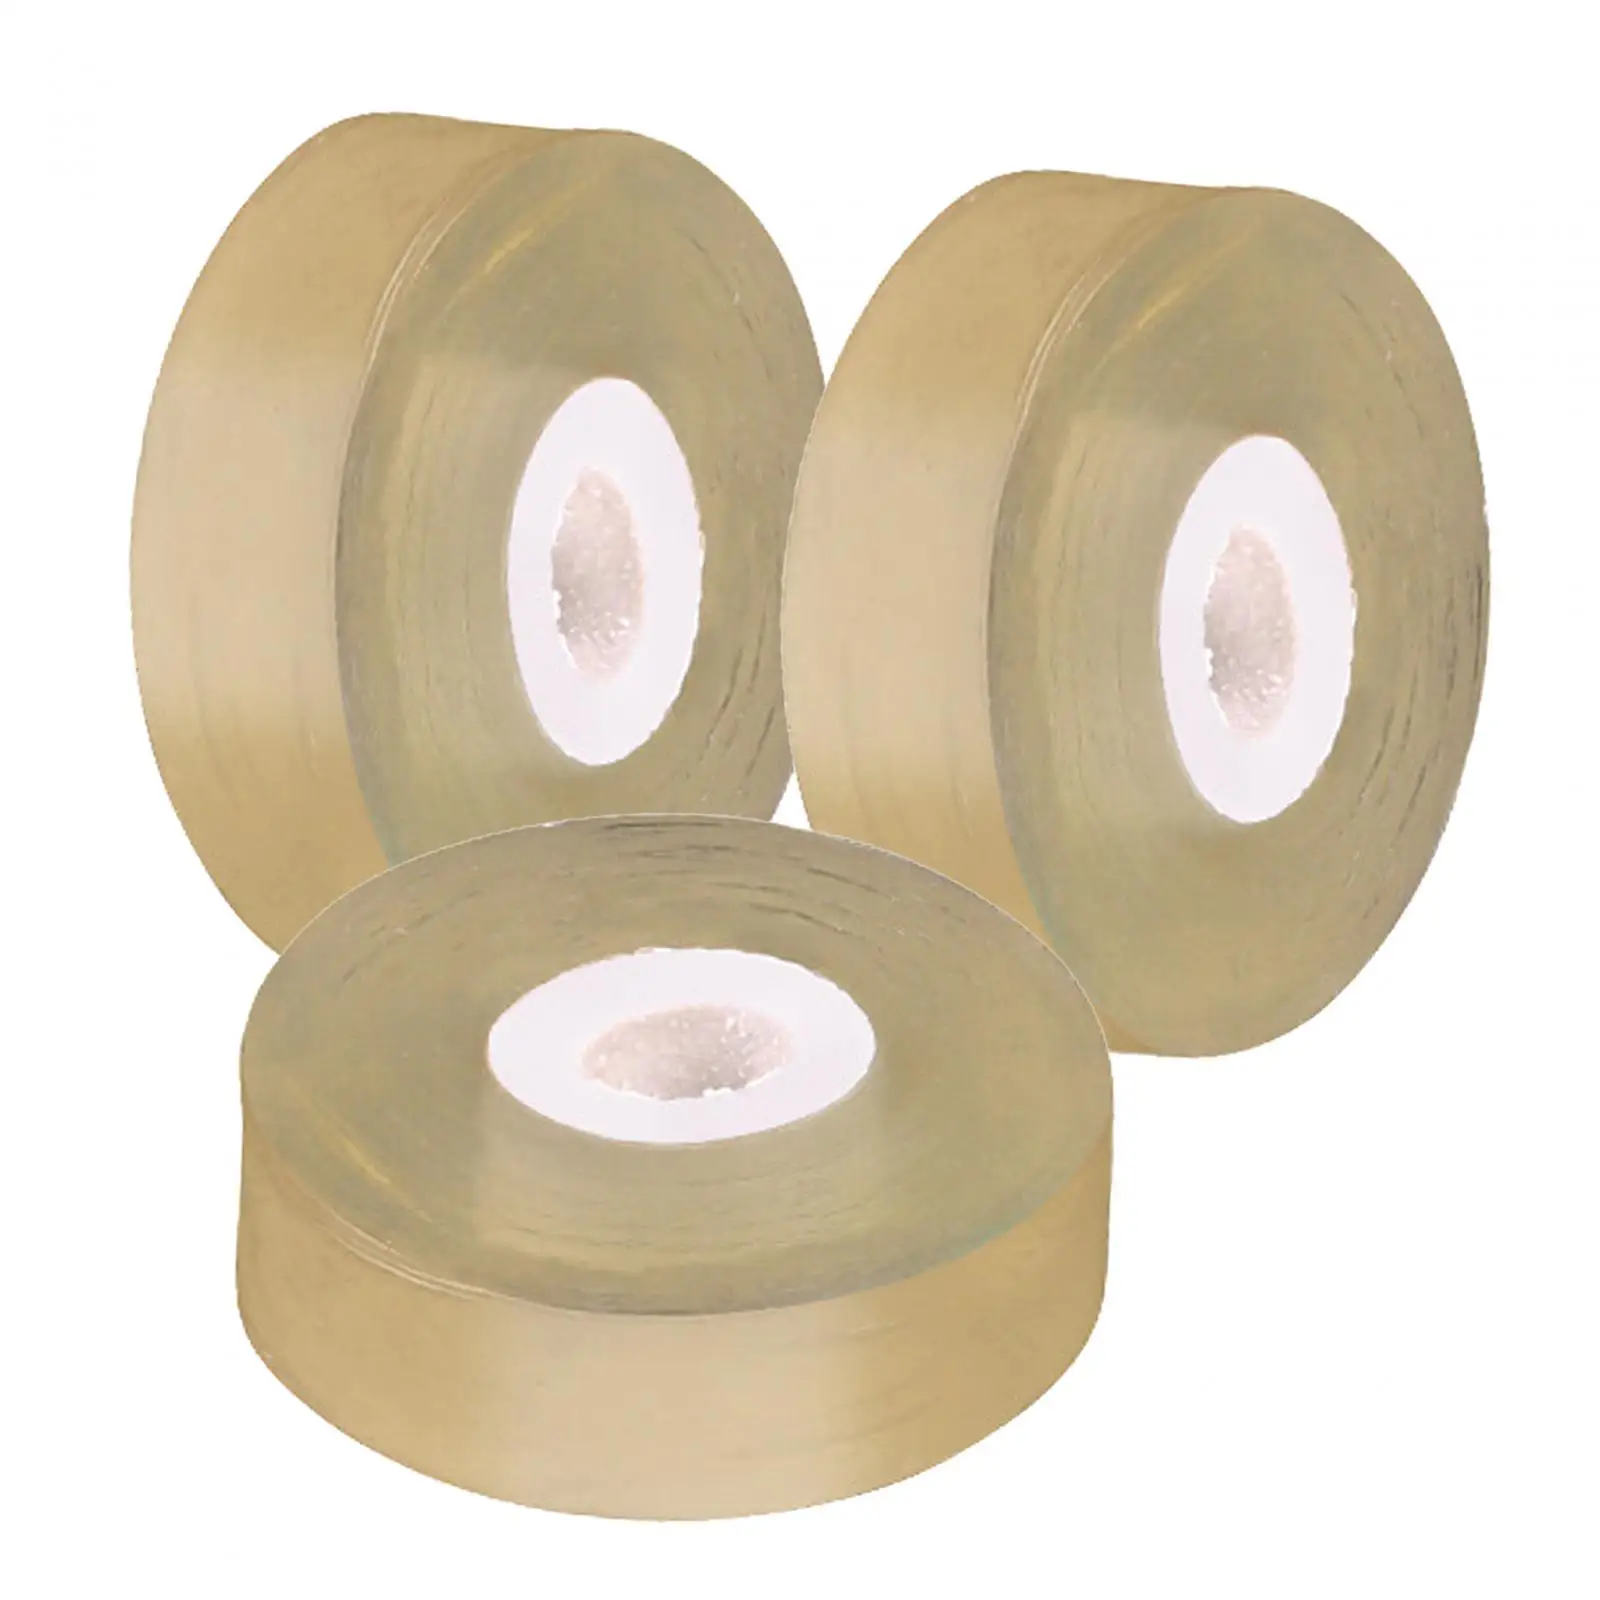 3x Self Adhesive Plants Repair Poly Budding Tapes for Fruit Trees 2cm